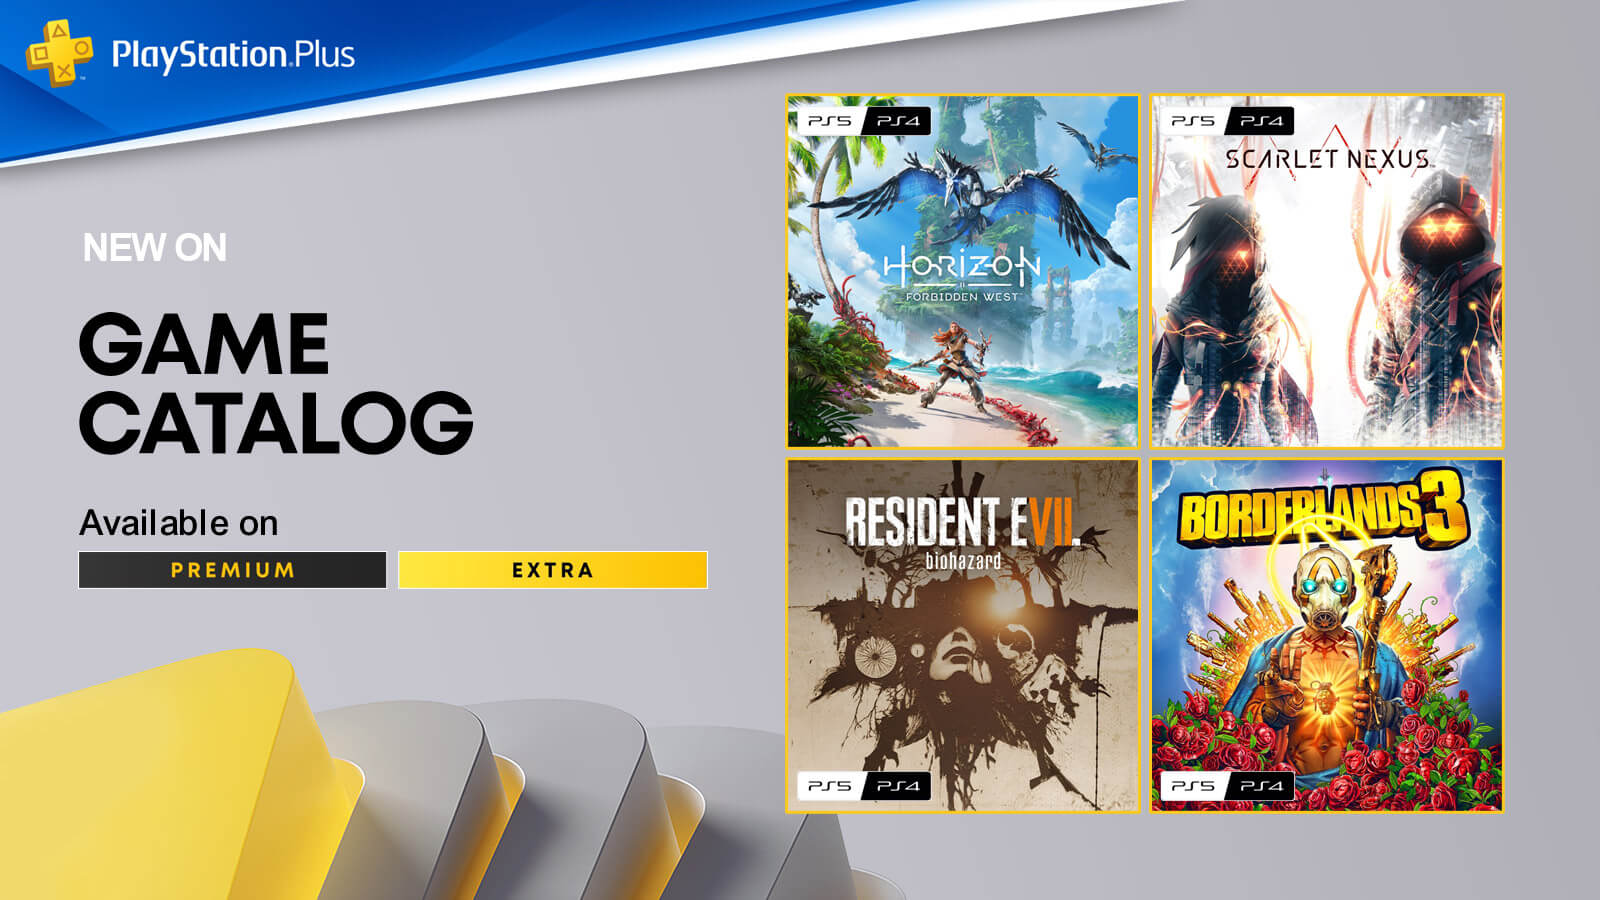 PlayStation Plus Monthly Games and Game Catalog lineup for